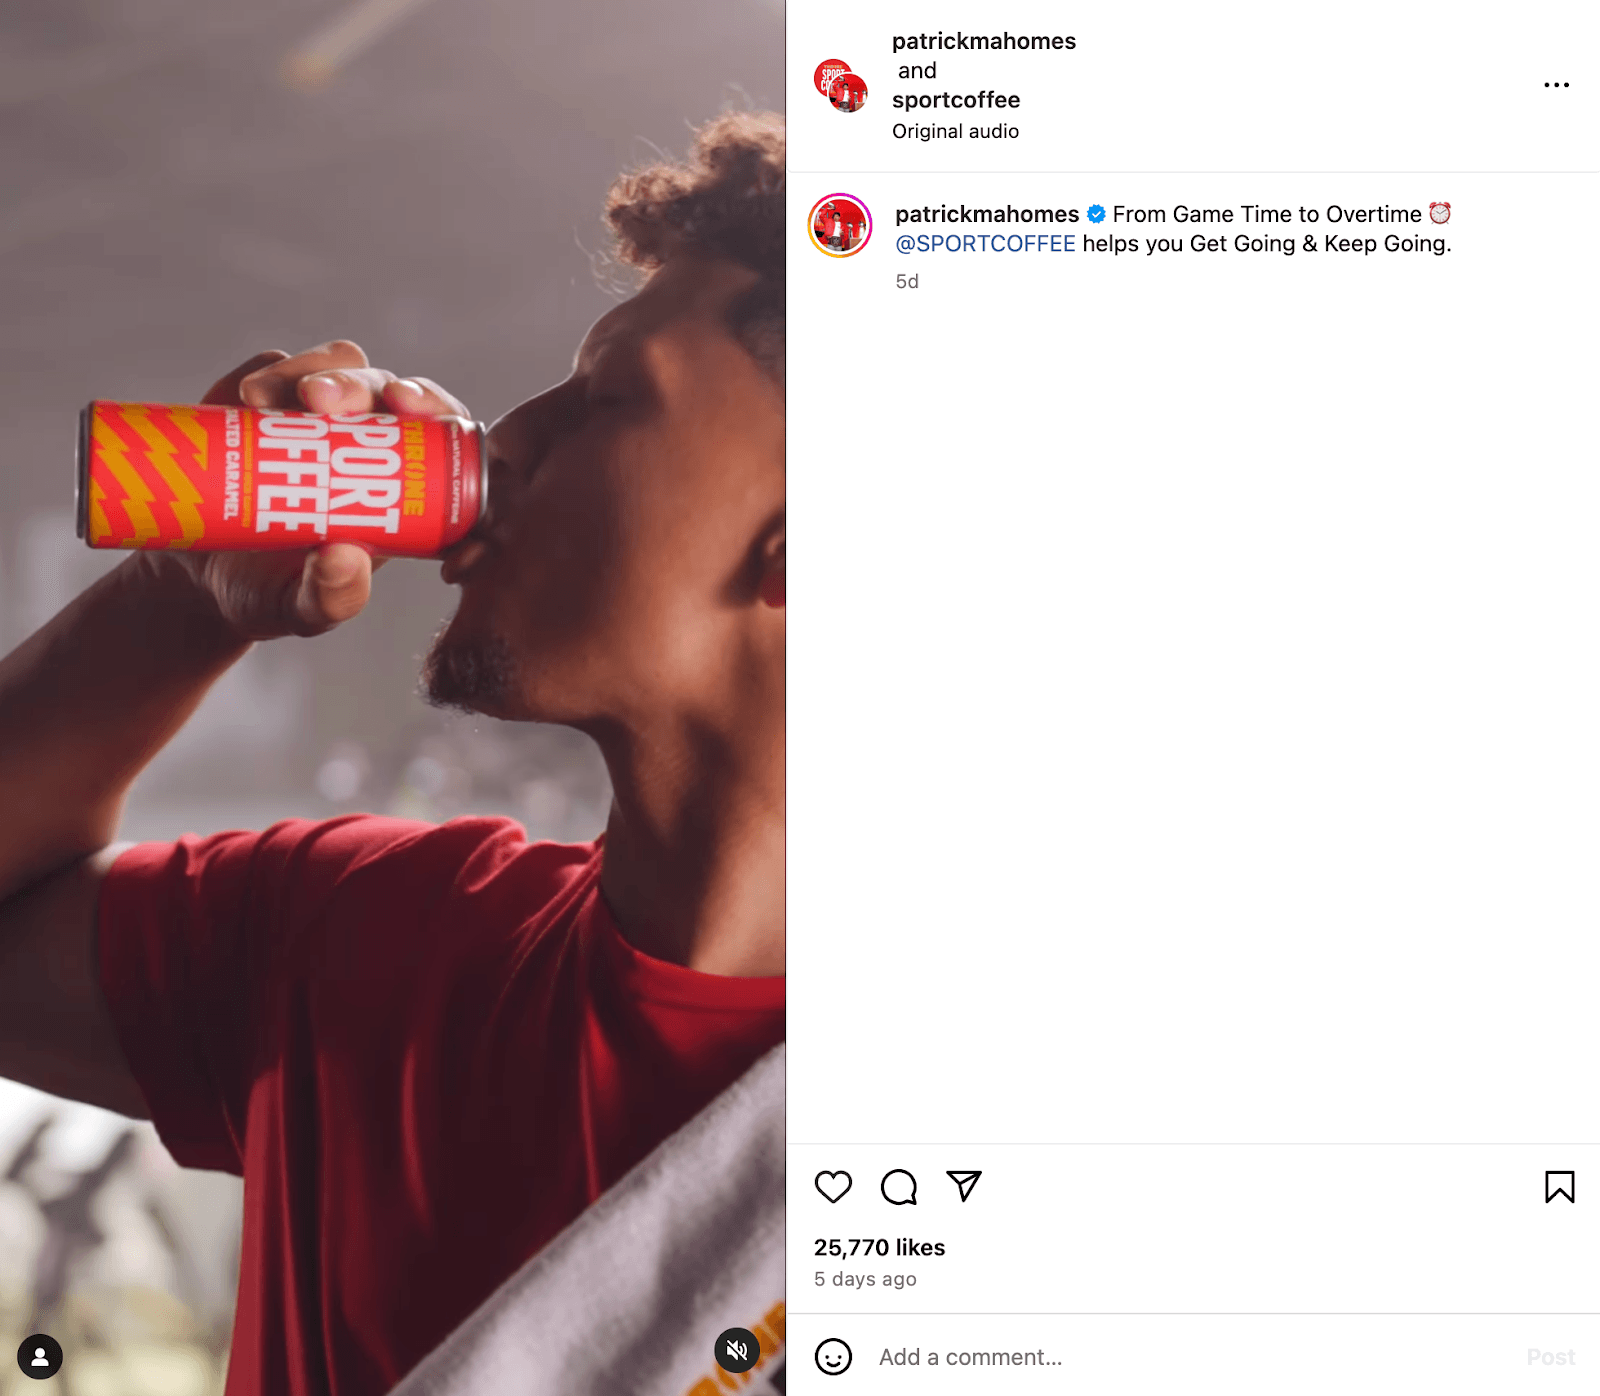 Collaboration of Sport Coffee and NFL superstar, Patrick Mahomes, as marketing strategy example